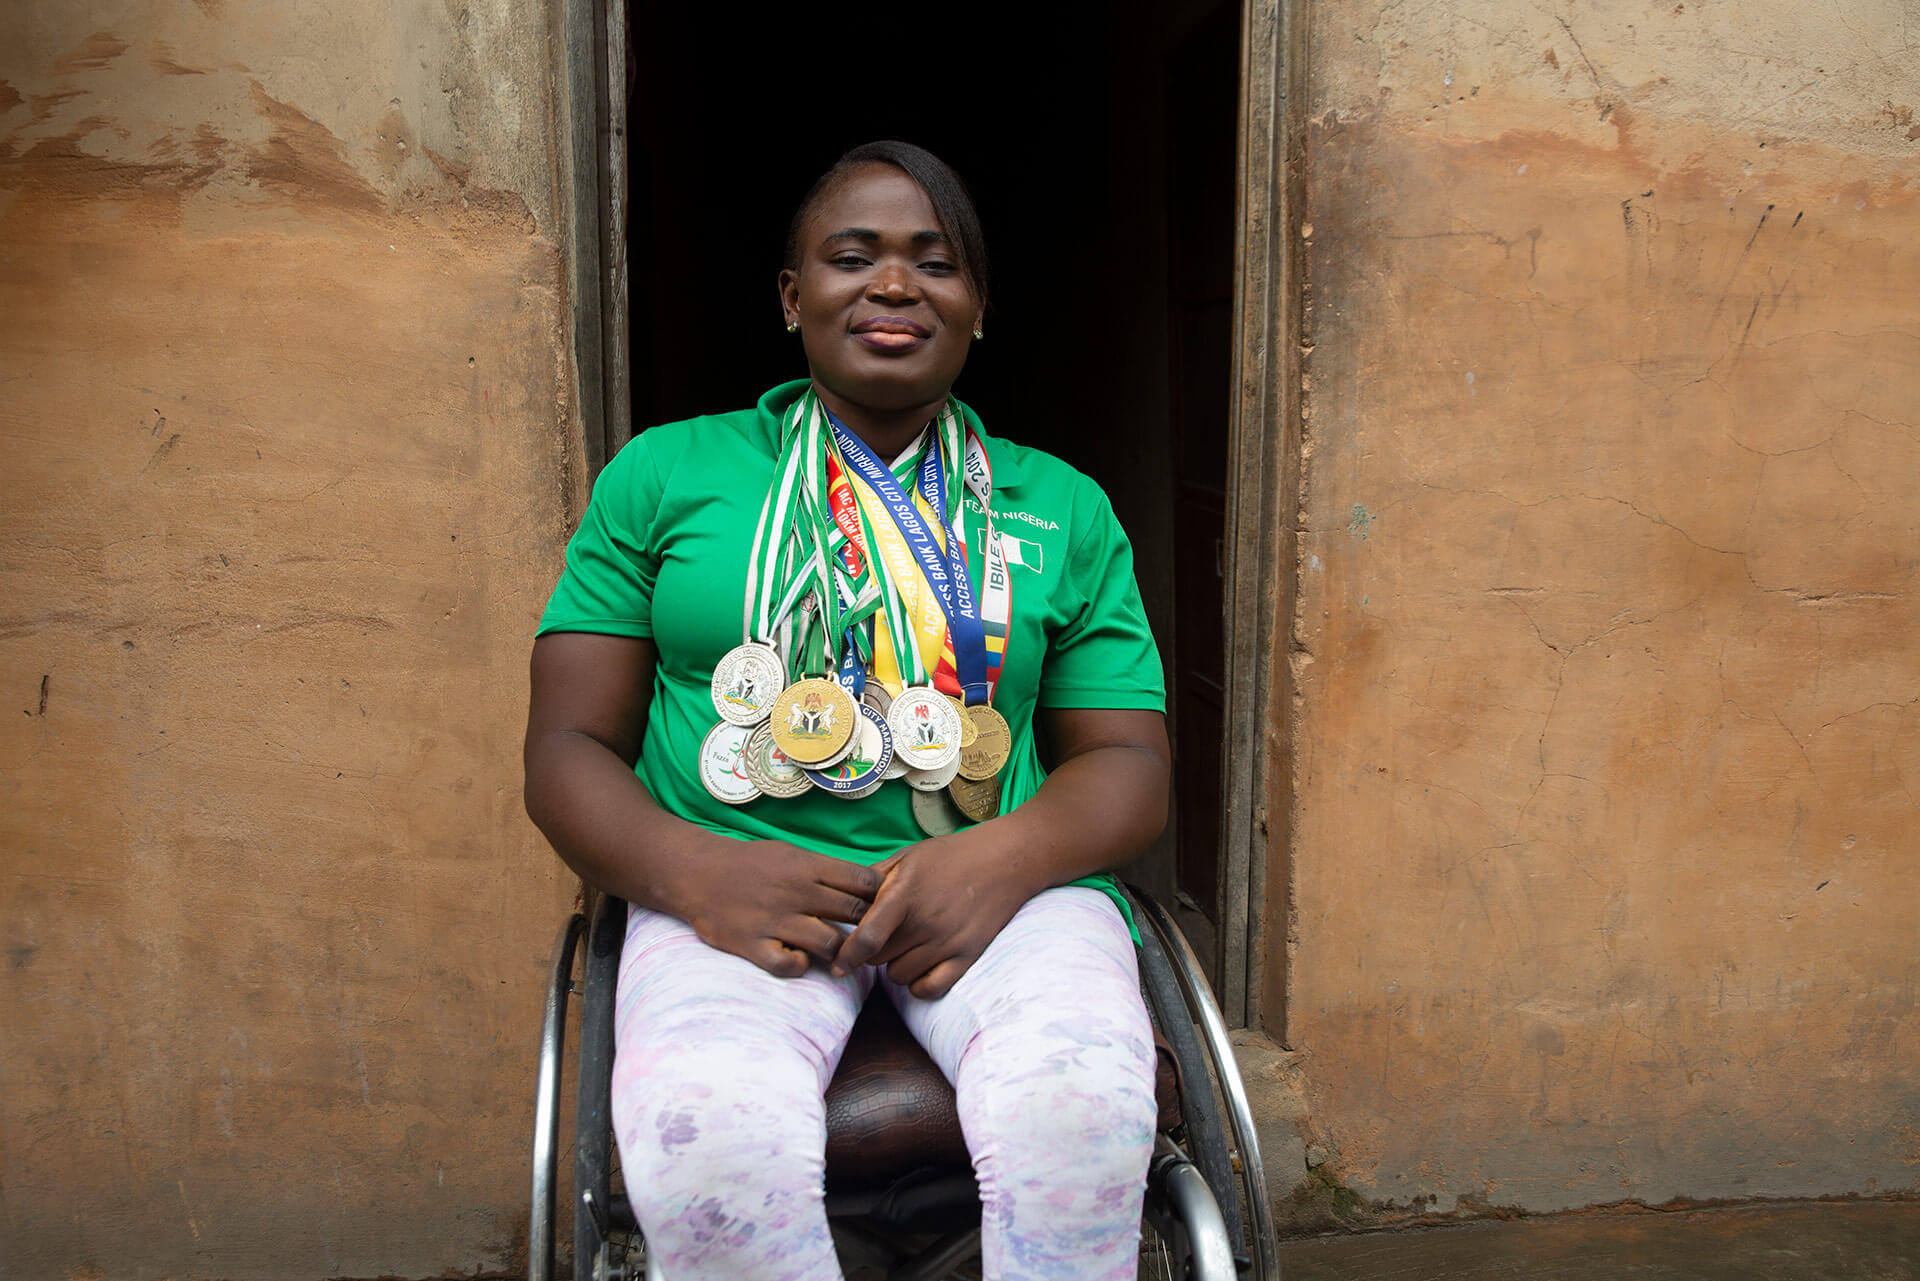 Olajumoke wears all her medals and smiles at the camera.